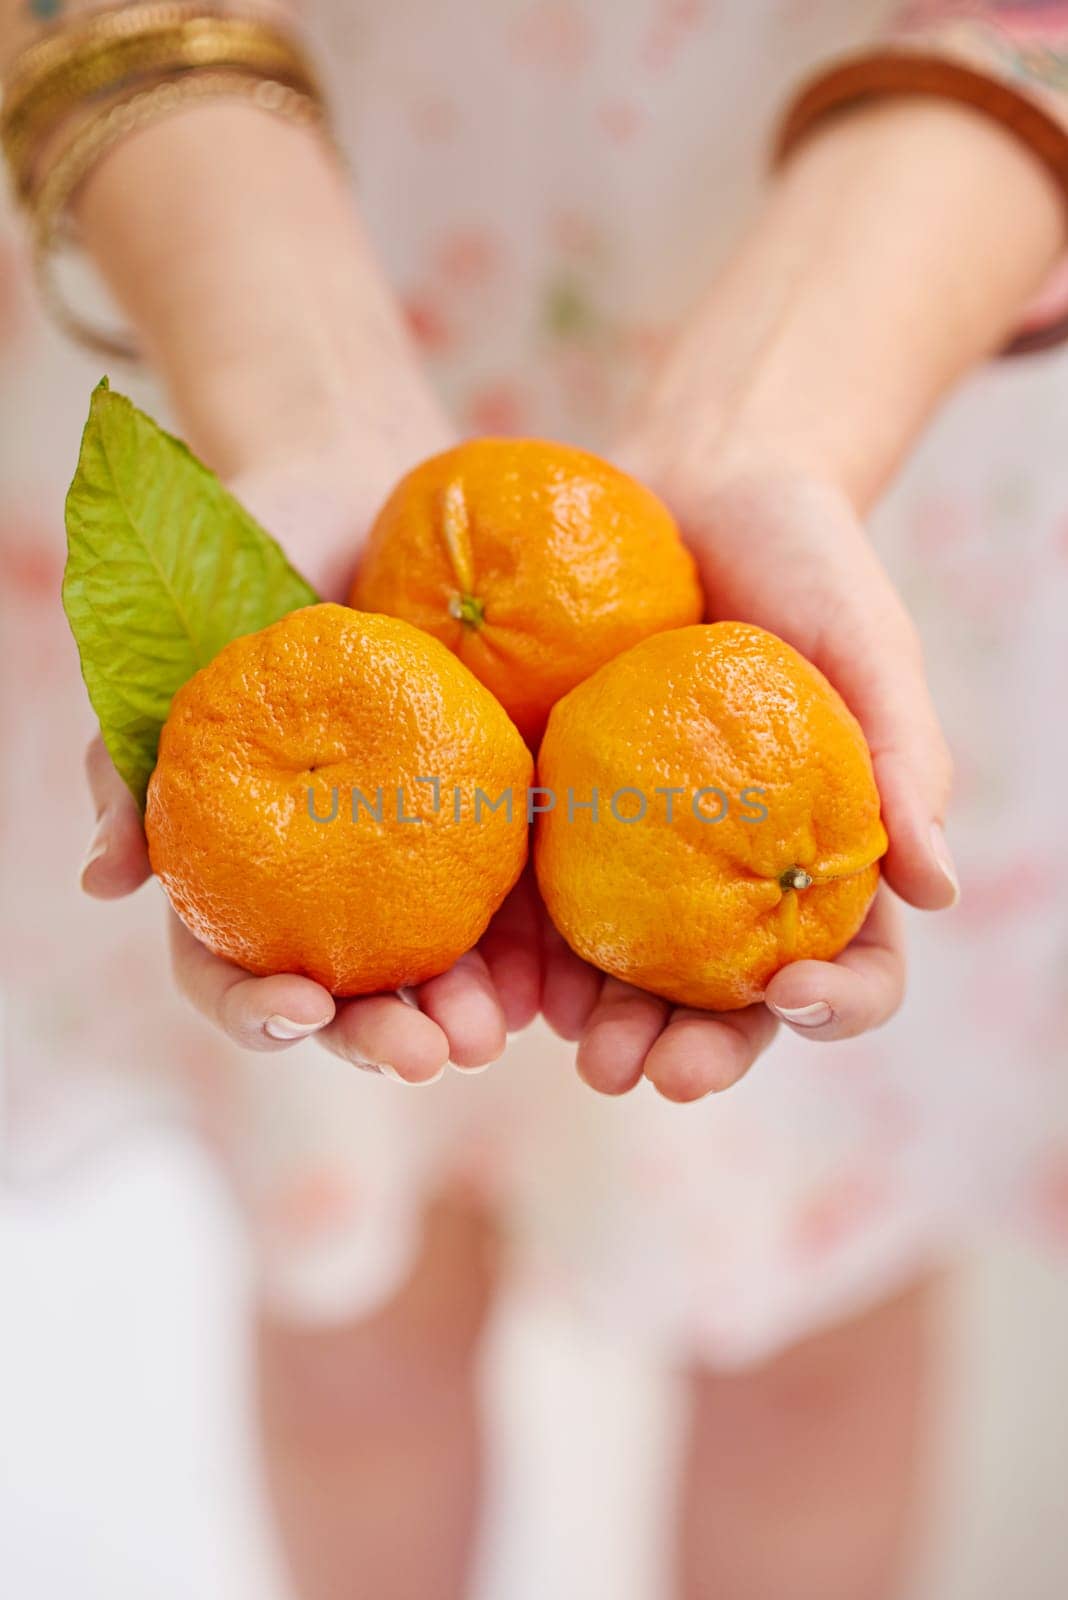 Woman, hands and fruit as oranges with vitamins for healthy, organic and balanced diet with nutrition snacks. Person, fresh and care for tangerine with natural ingredients from farming plantation.